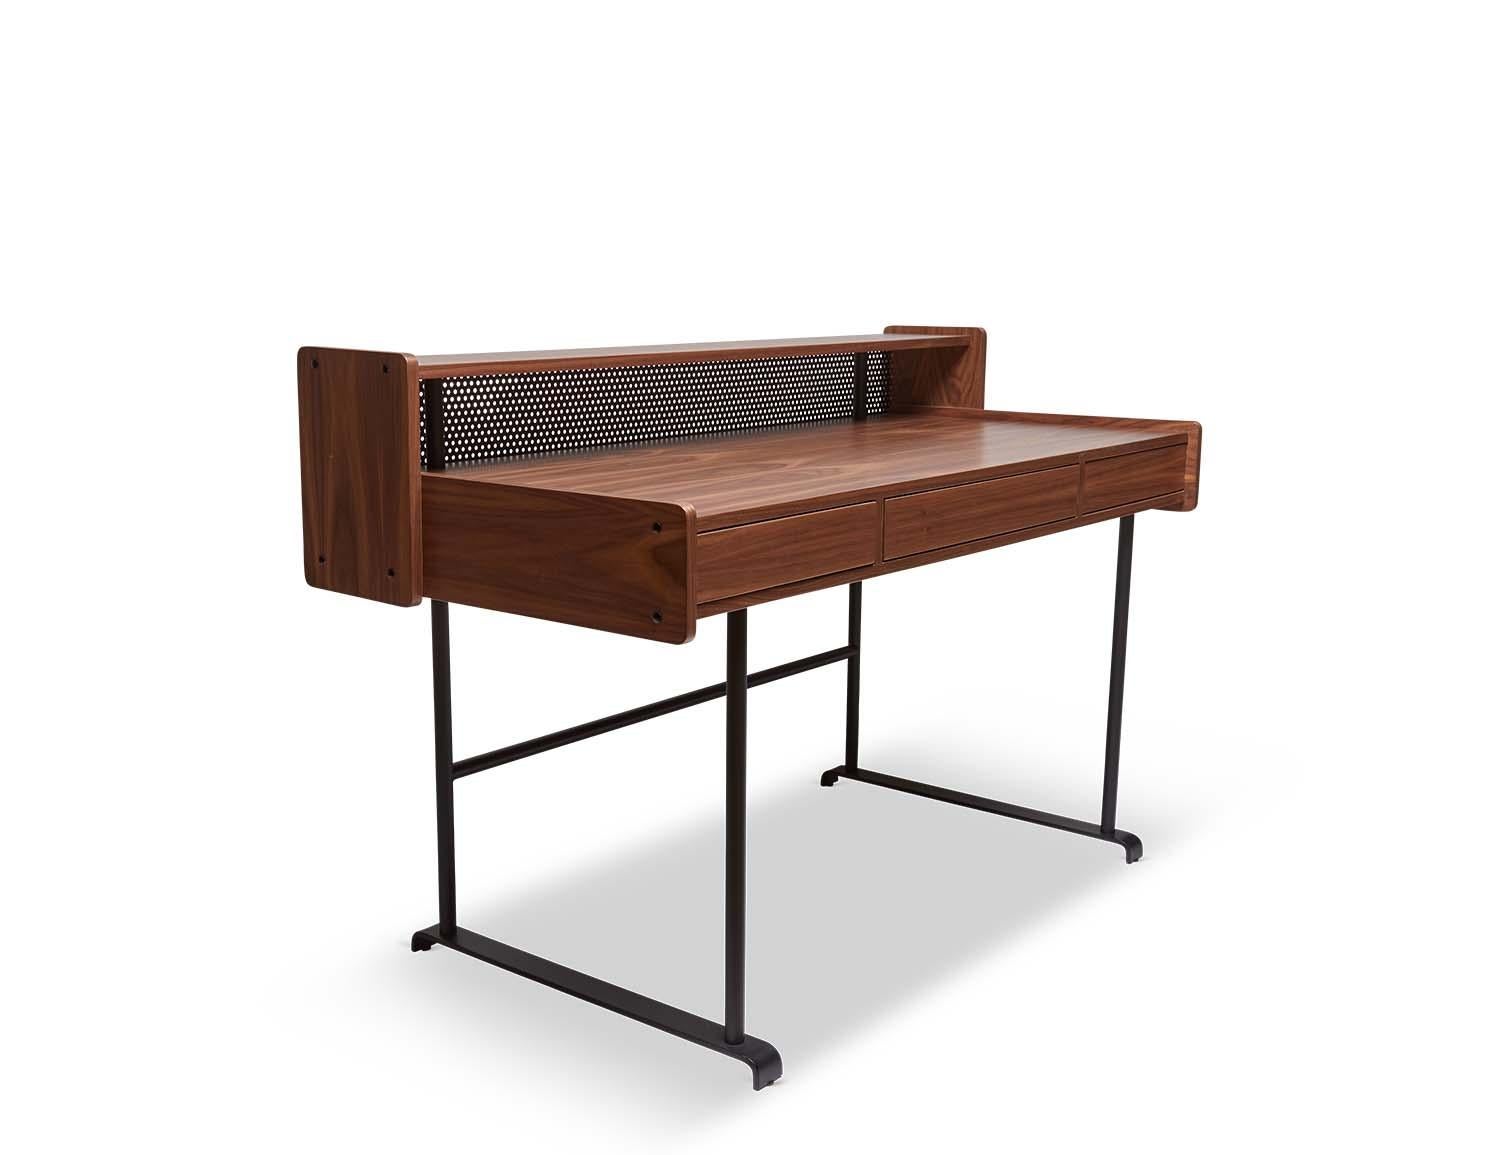 The Maker's desk is made of American walnut or white oak and has three push-to-open drawers. The case rests on a matte black powder-coated base, and features perforated steel detail on the back. Shown here in Natural Walnut.

The Lawson-Fenning